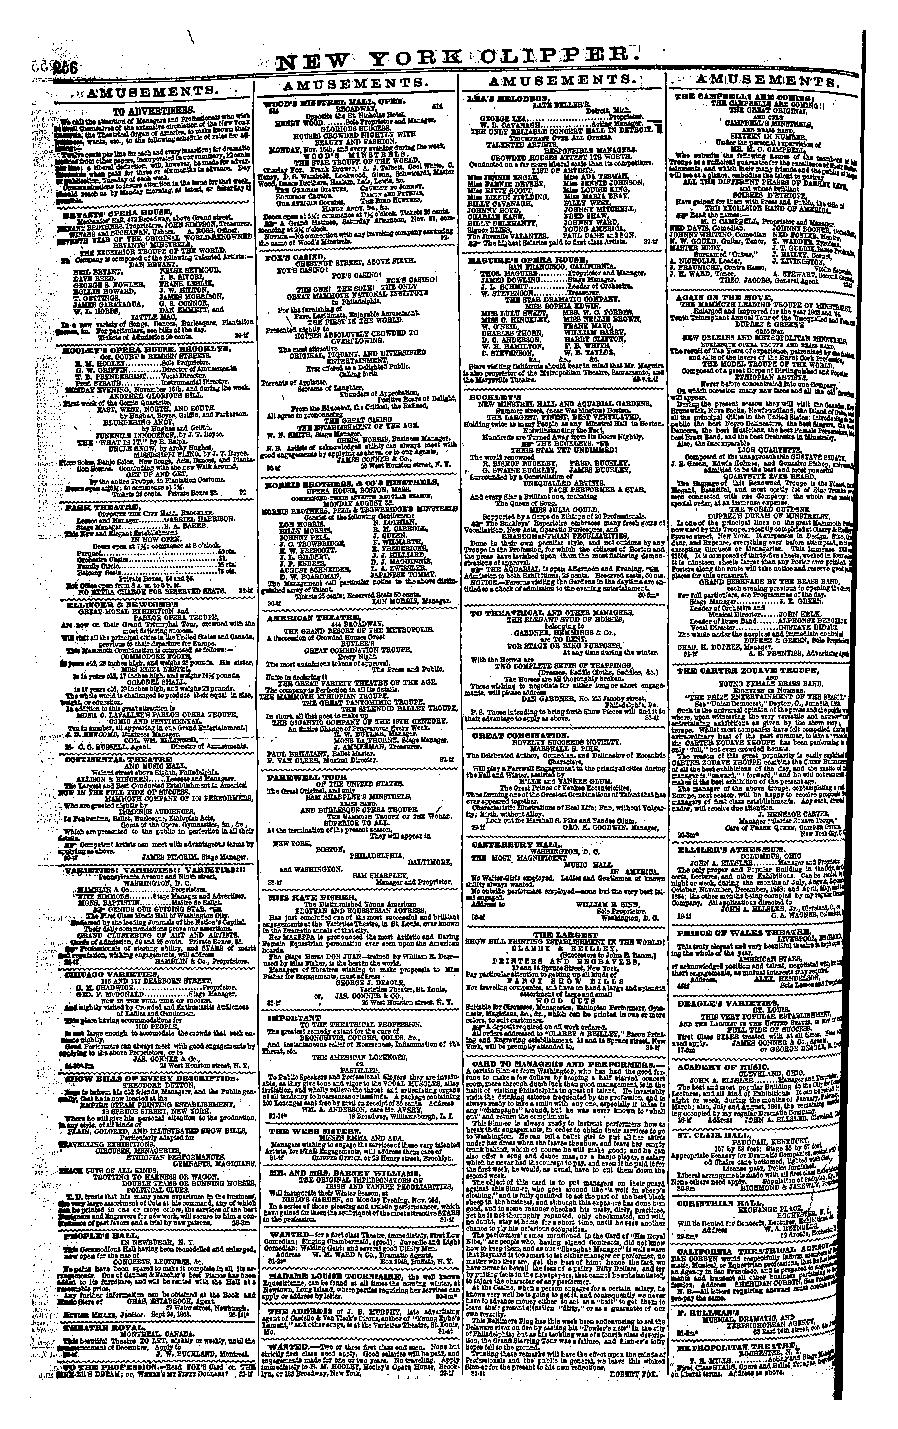 Thumbnail image of a page from New York Clipper